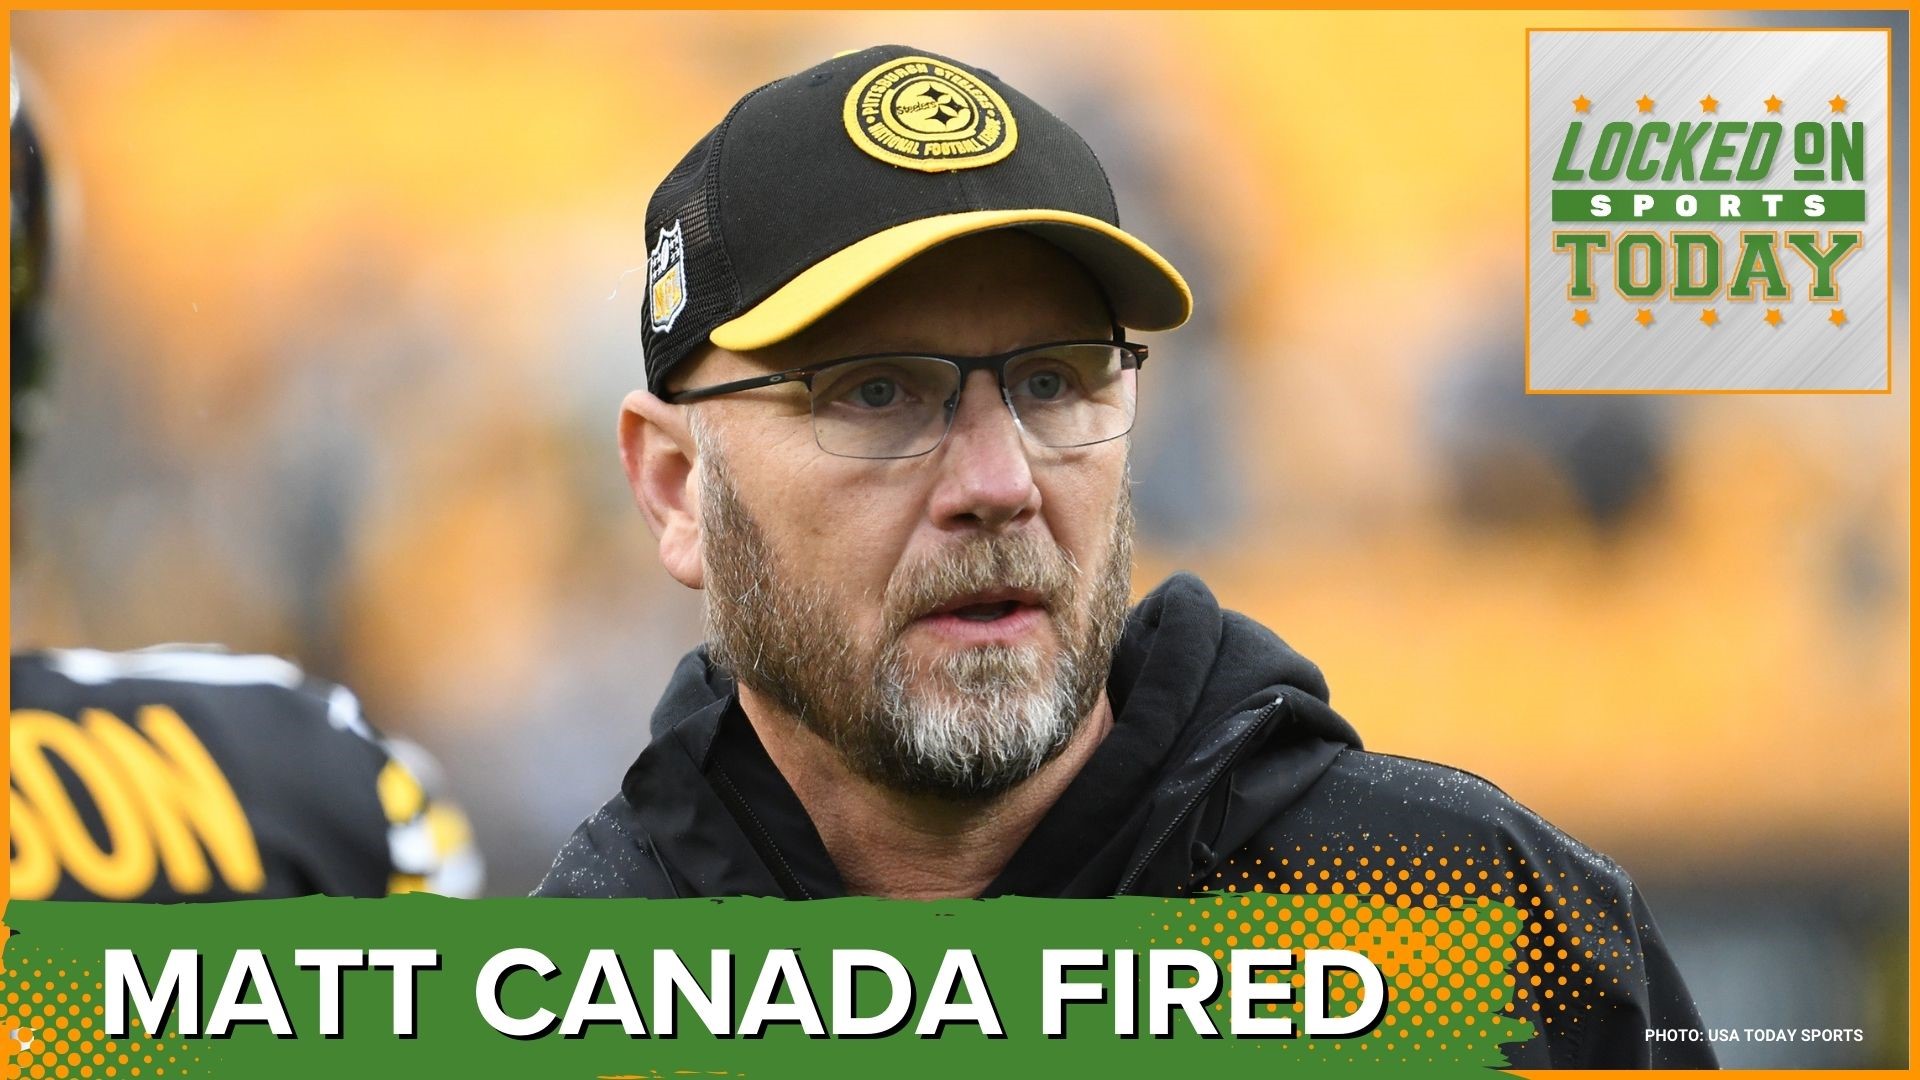 Discussing the day's top sports stories from the Steelers firing Matt Canada to previewing the Seahawks vs. the 49ers and Ryan Day not planning to leave OSU.